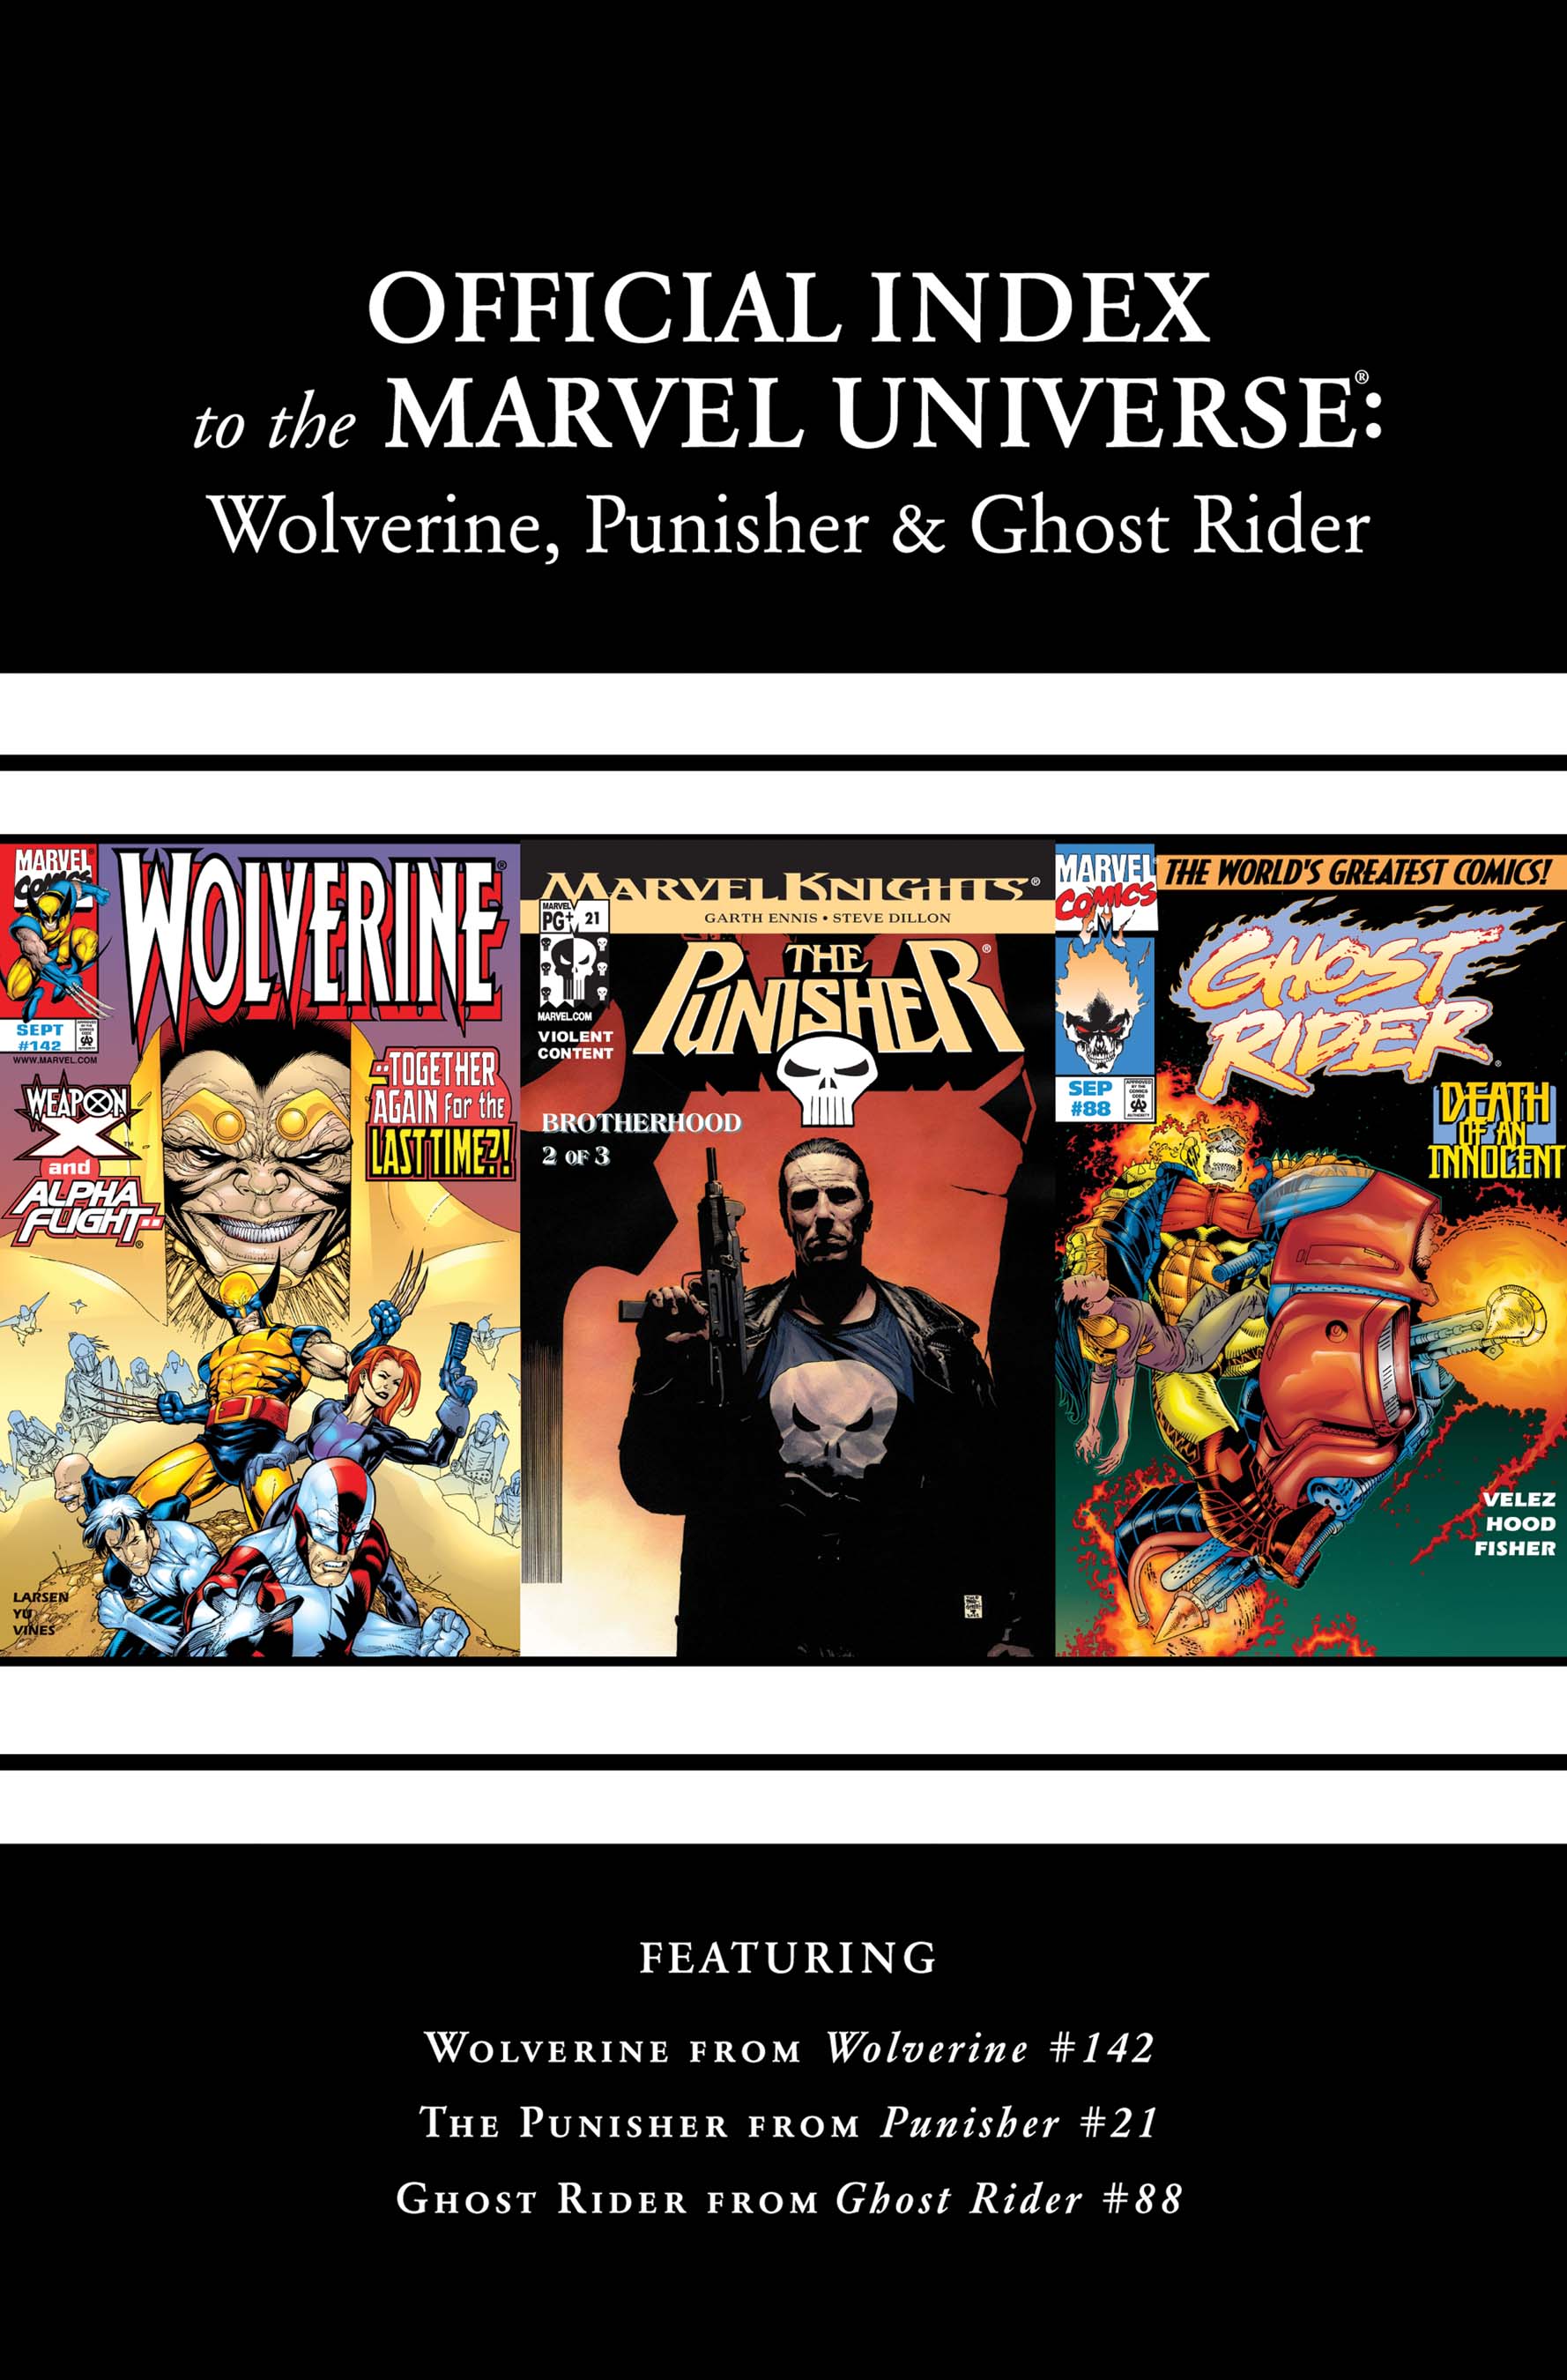 Wolverine, Punisher & Ghost Rider: Official Index to the Marvel Universe (2011) #5